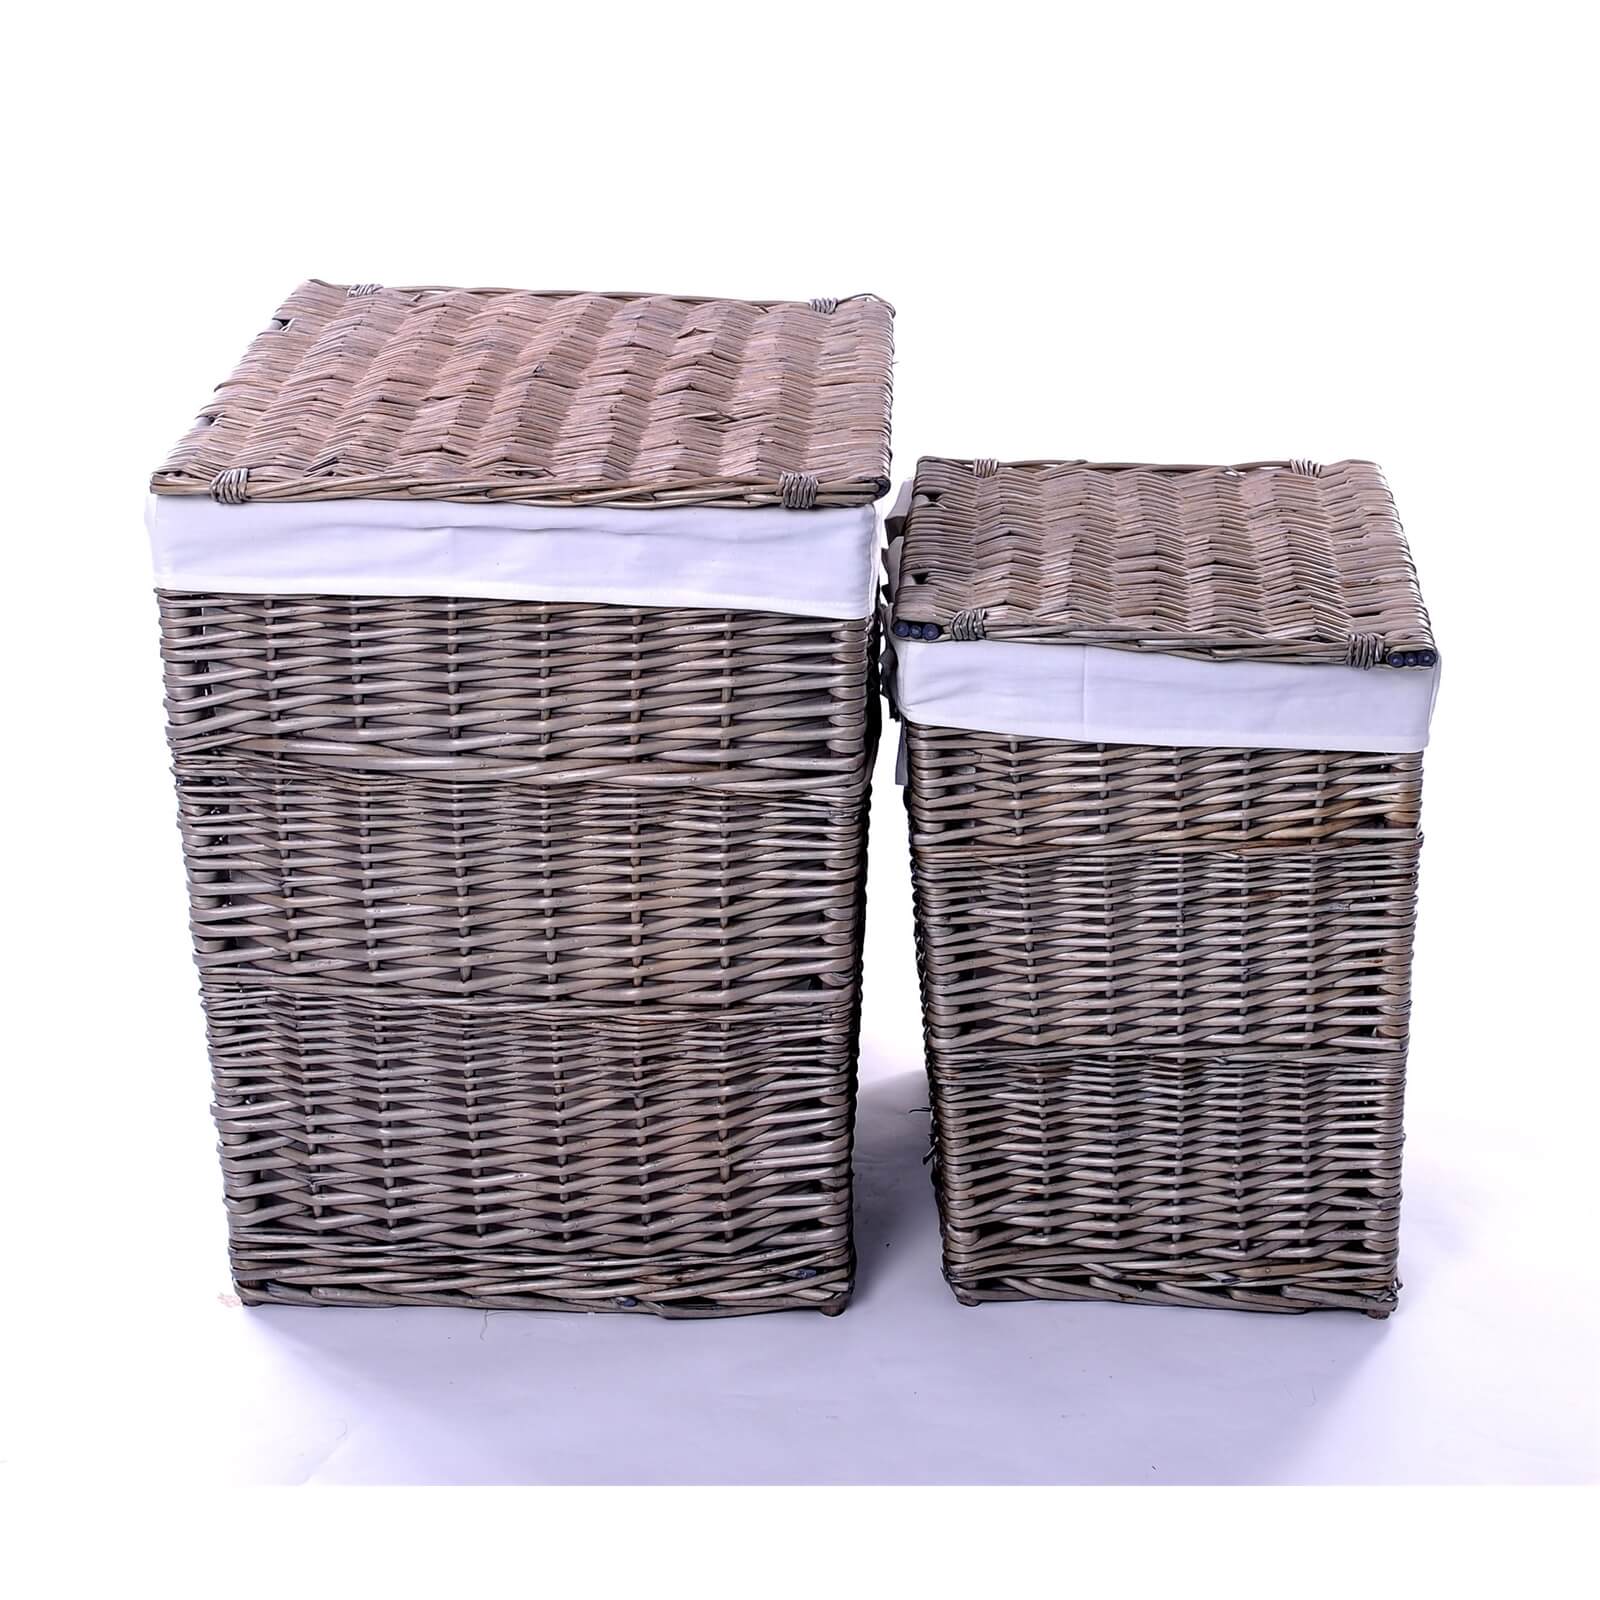 Square Wicker Laundry Baskets - Set of 2